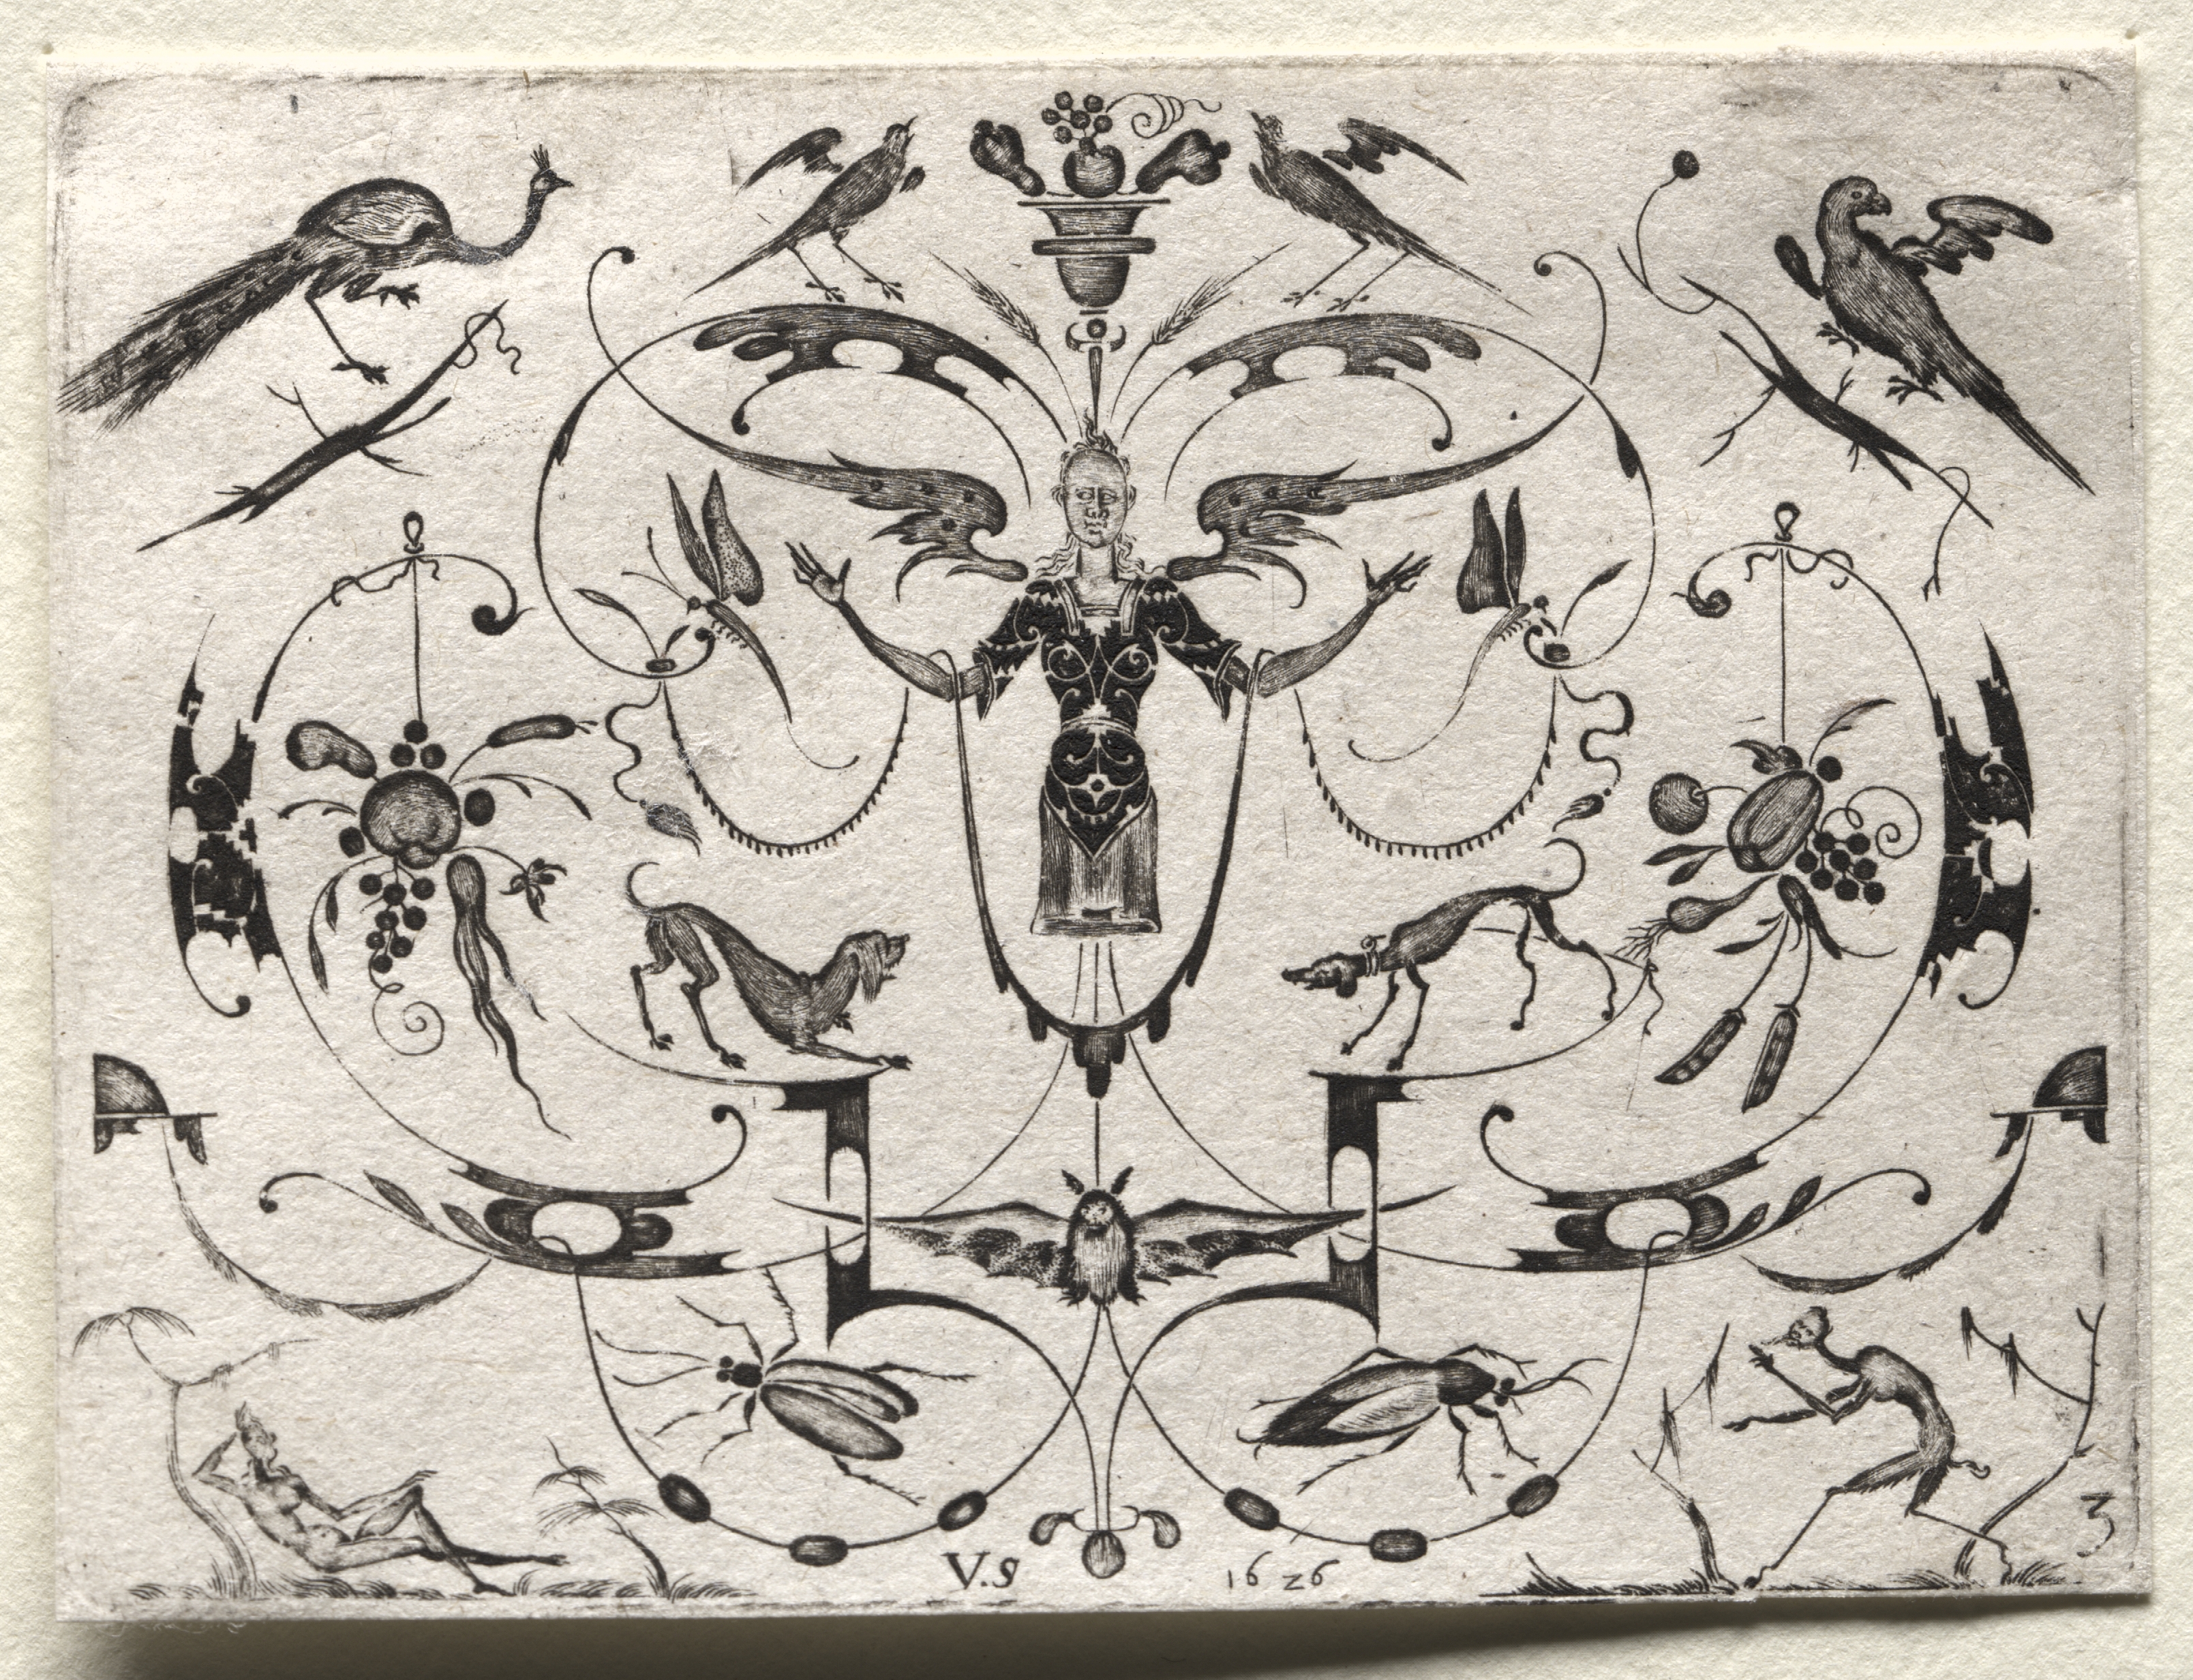 Arabesque with Peacock, Parakeet, Dogs and Insects